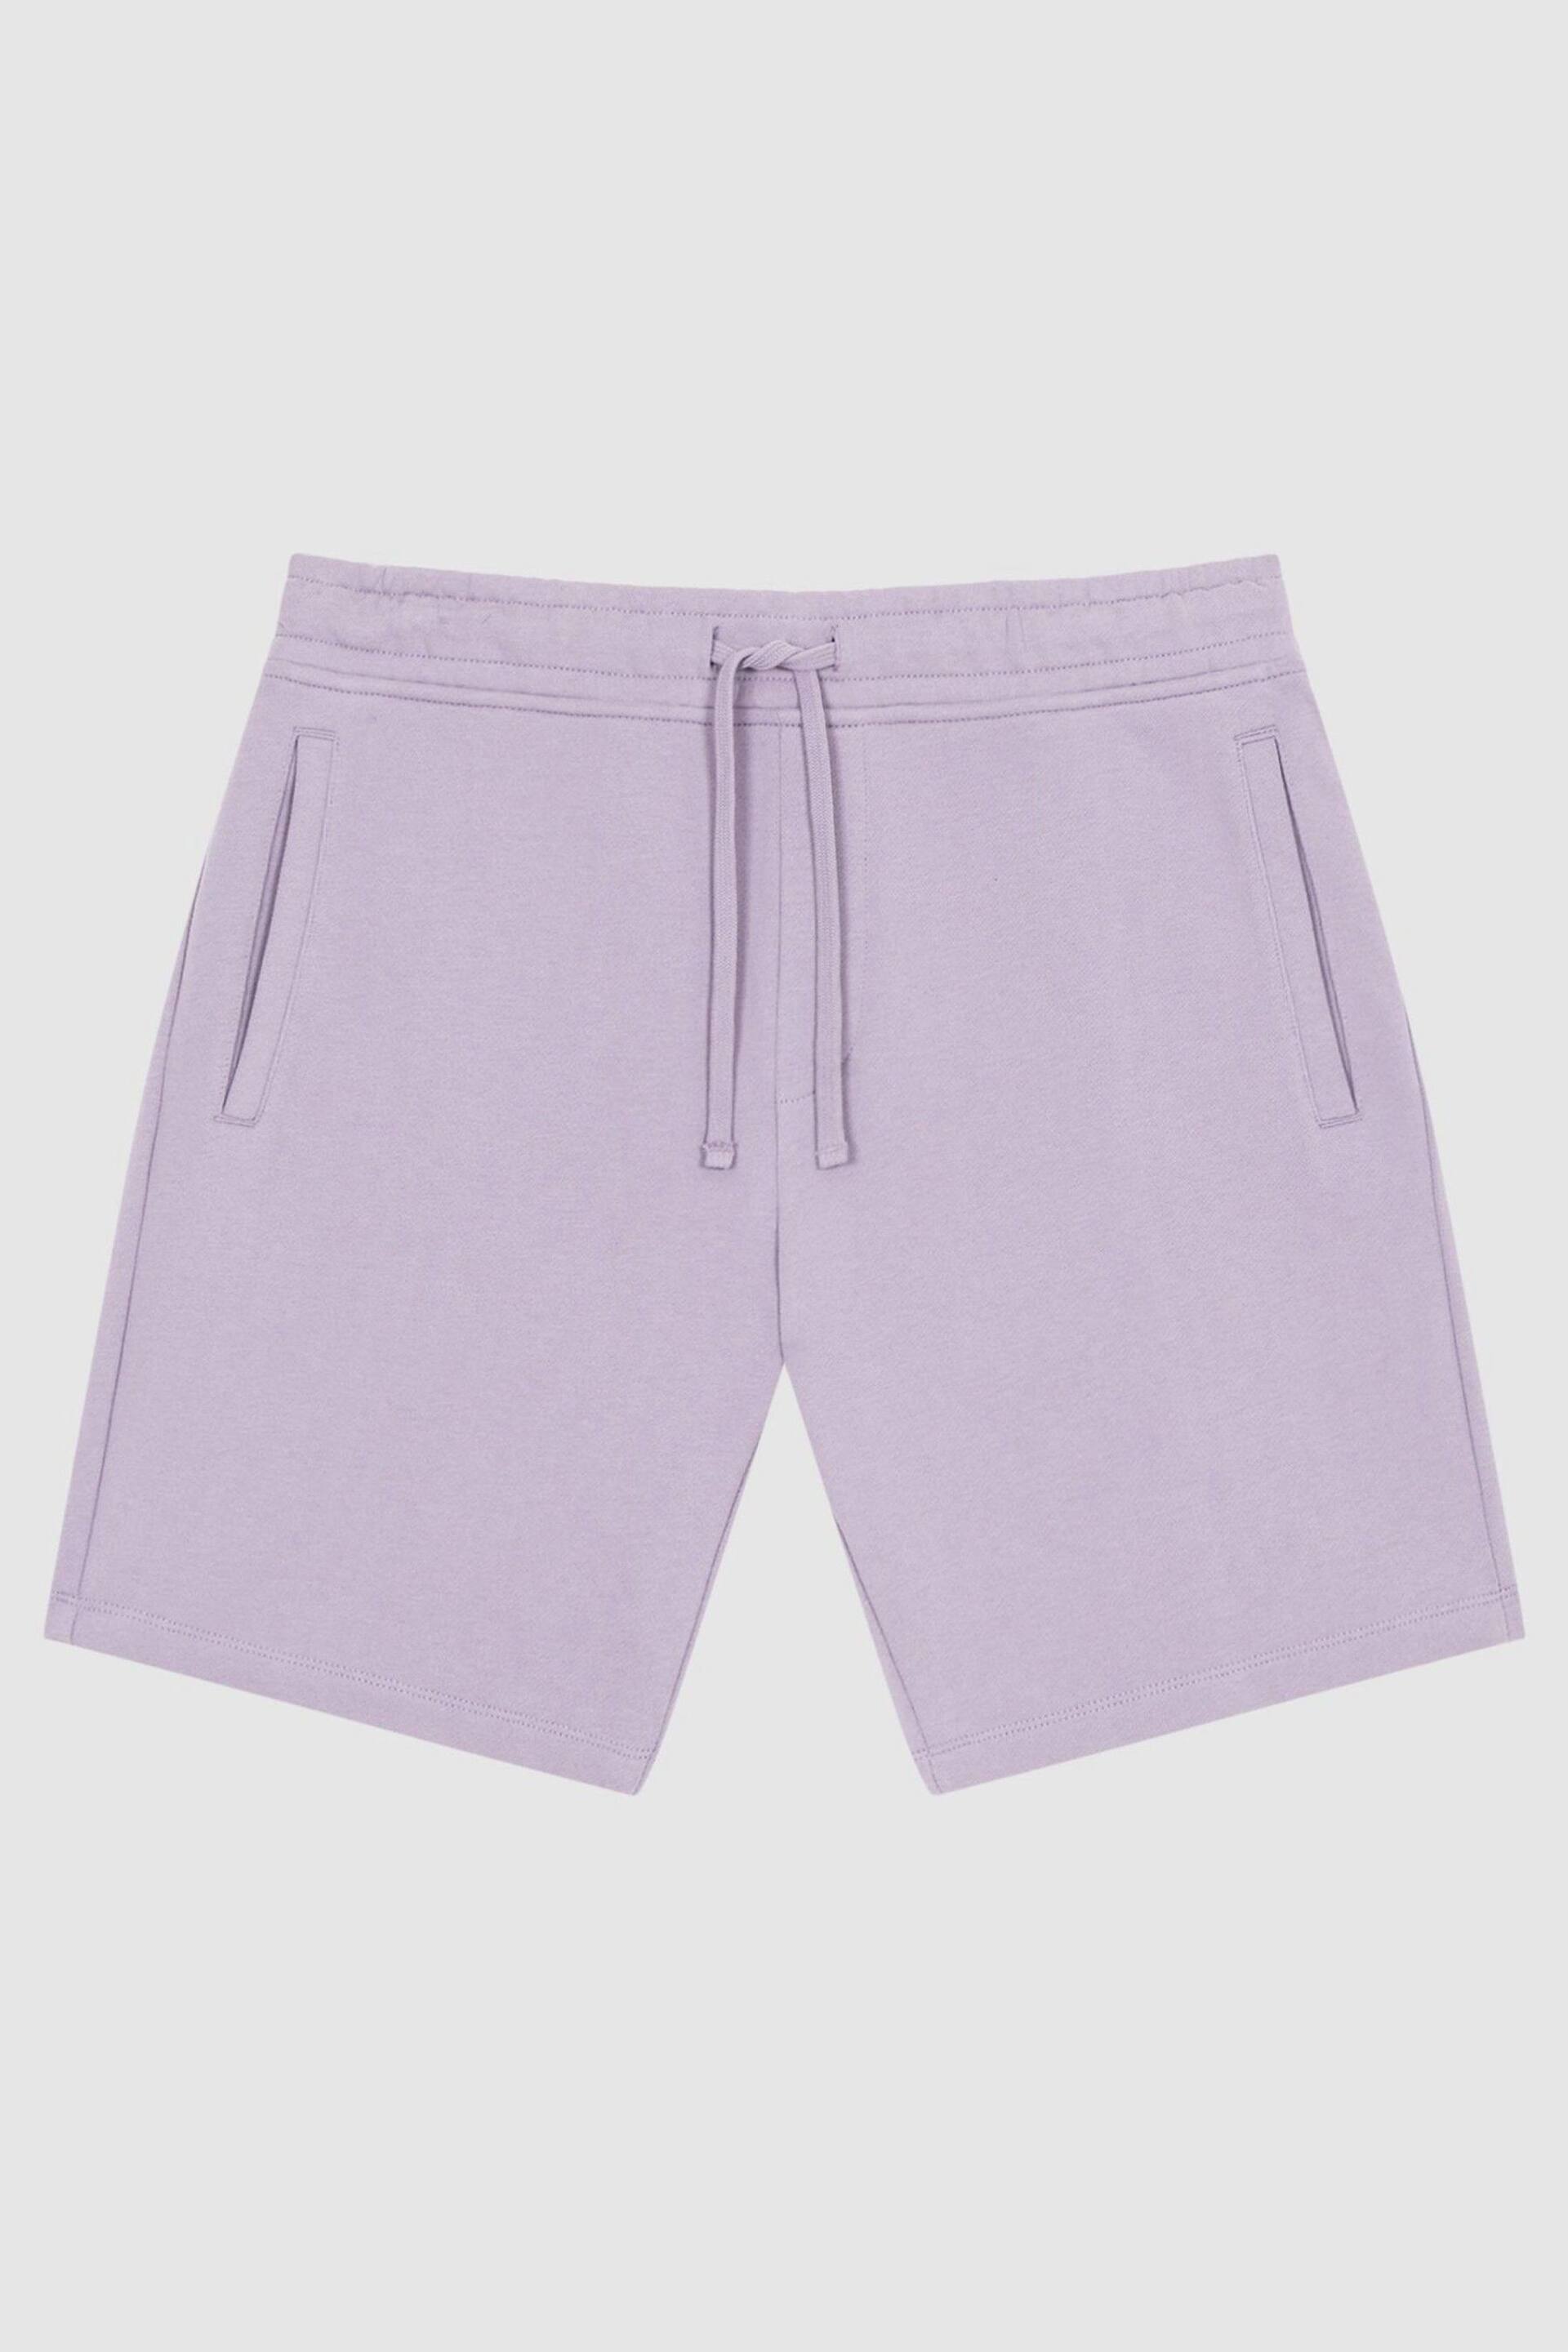 Reiss Lilac Henry Garment Dye Jersey Shorts - Image 2 of 5